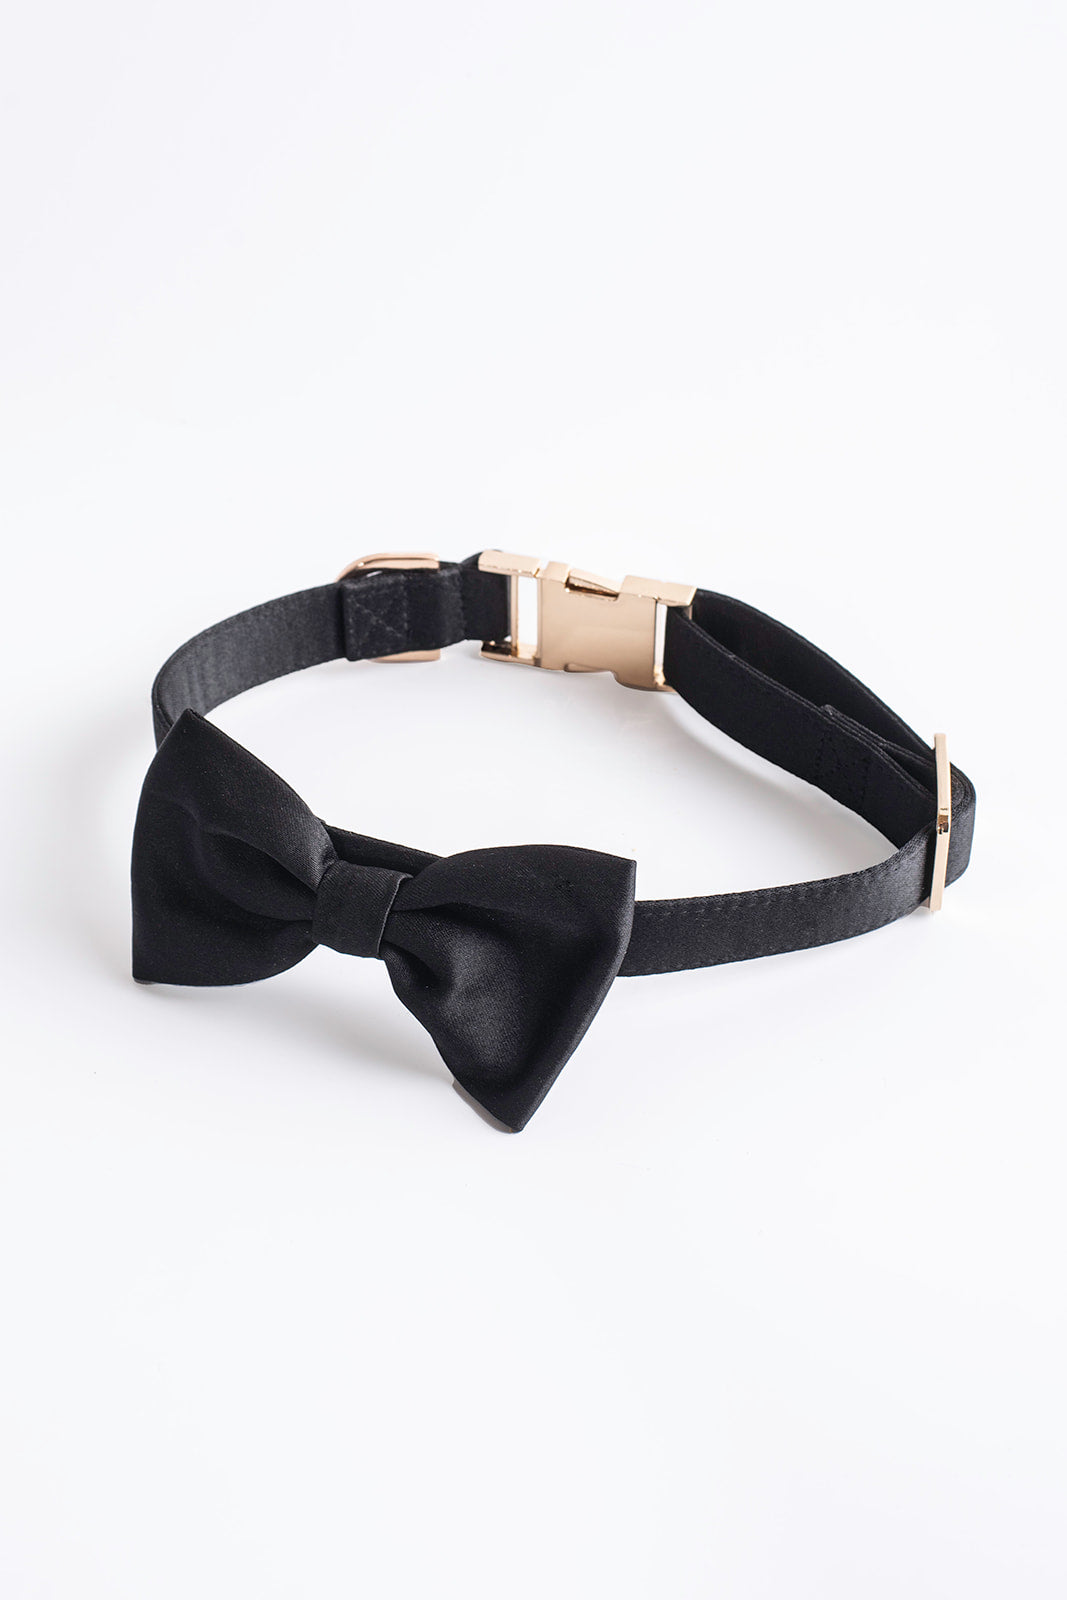 *IN STOCK NOW* The Bestie Pet Bow in Odile Black